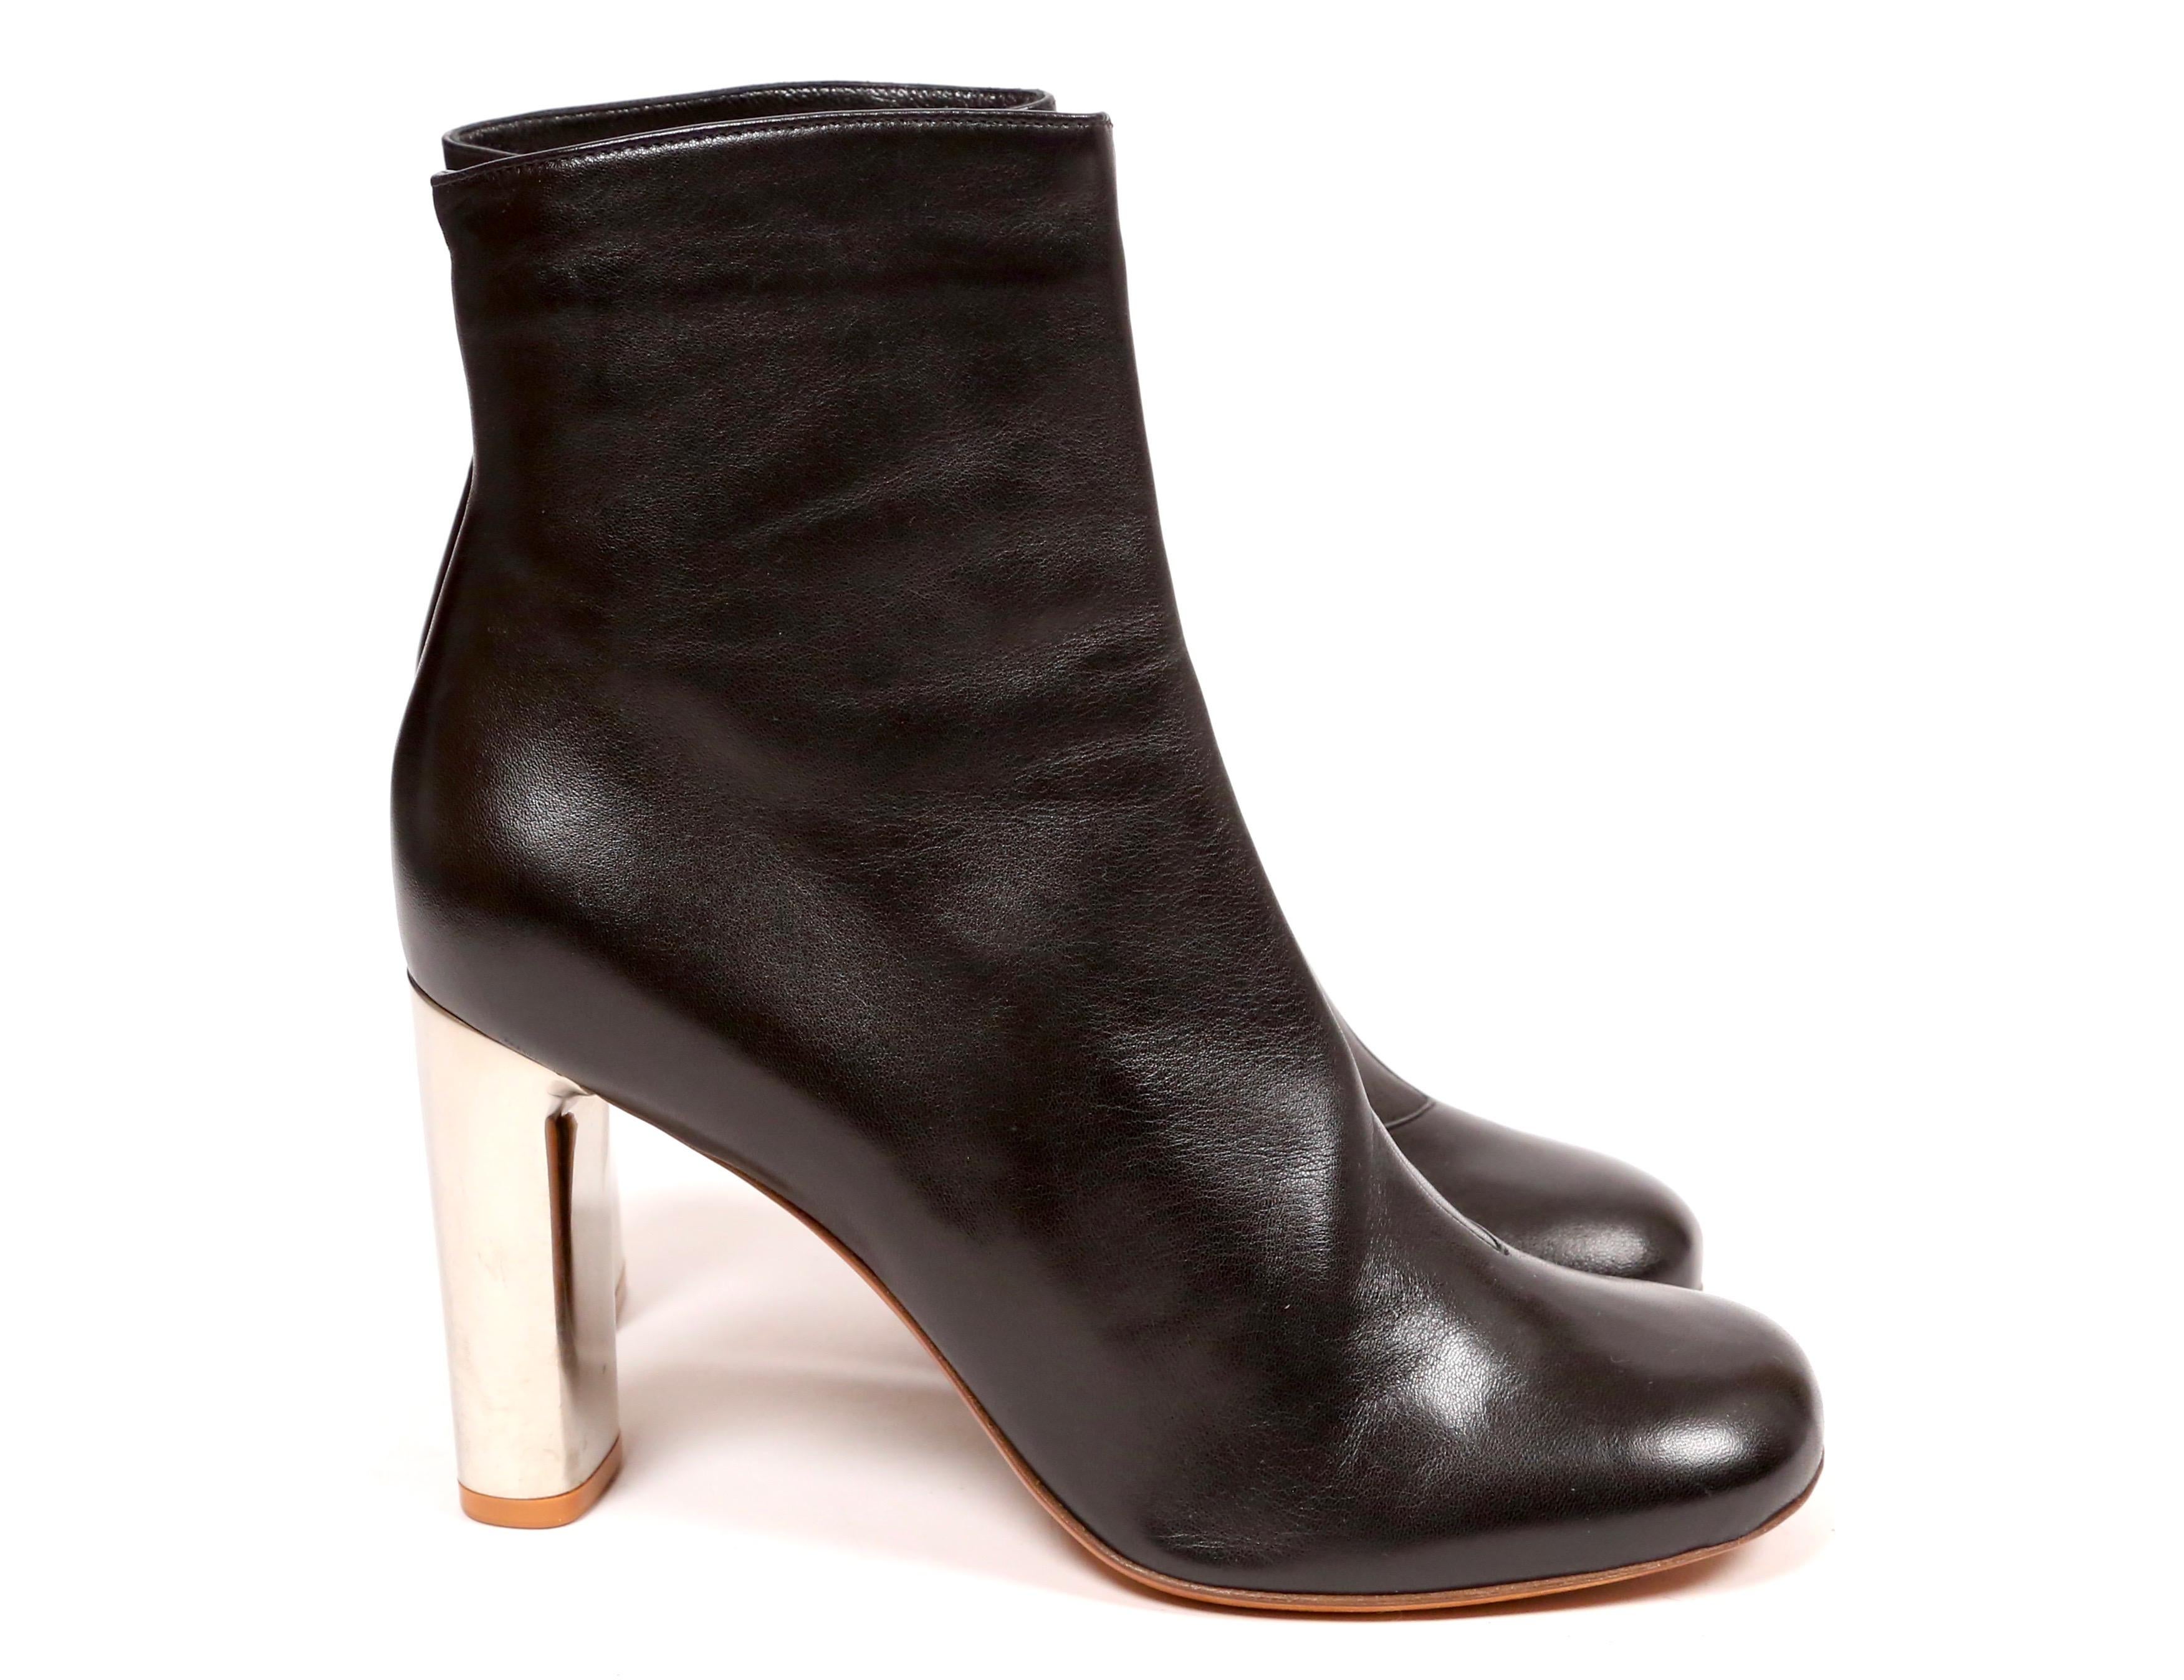 CELINE by PHOEBE PHILO black leather ankle boots with silver heels ...